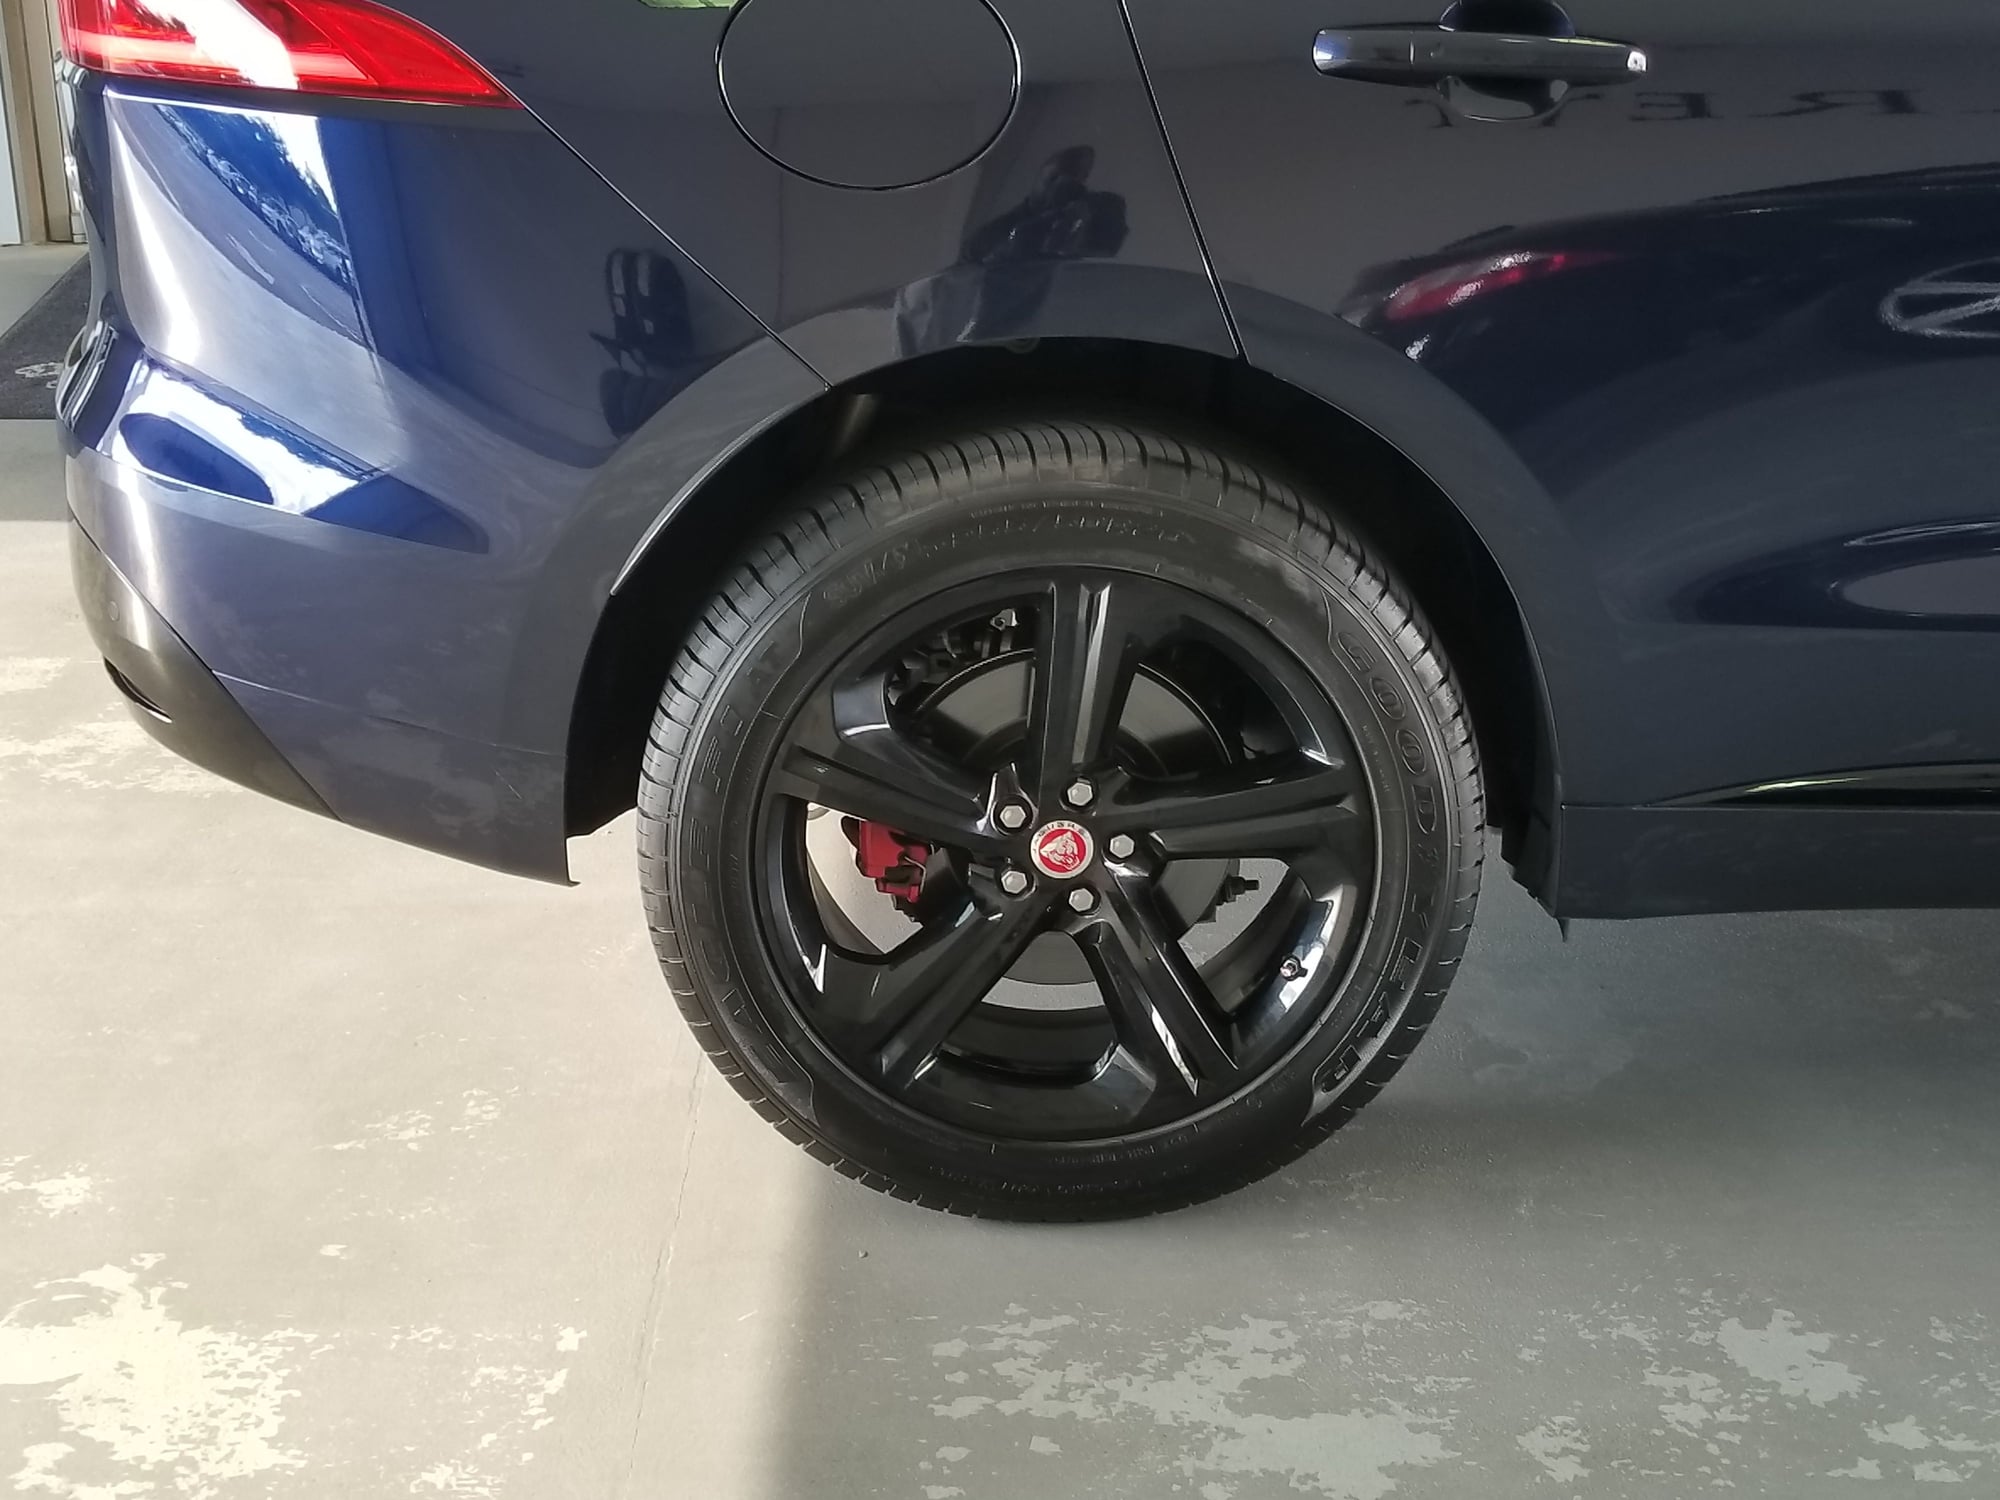 Wheels and Tires/Axles - 20-inch Jaguar F-Pace Factory Black Rims with Goodyear tires - $2000 - Used - 2017 to 2019 Jaguar F-Pace - San Antonio, TX 78261, United States